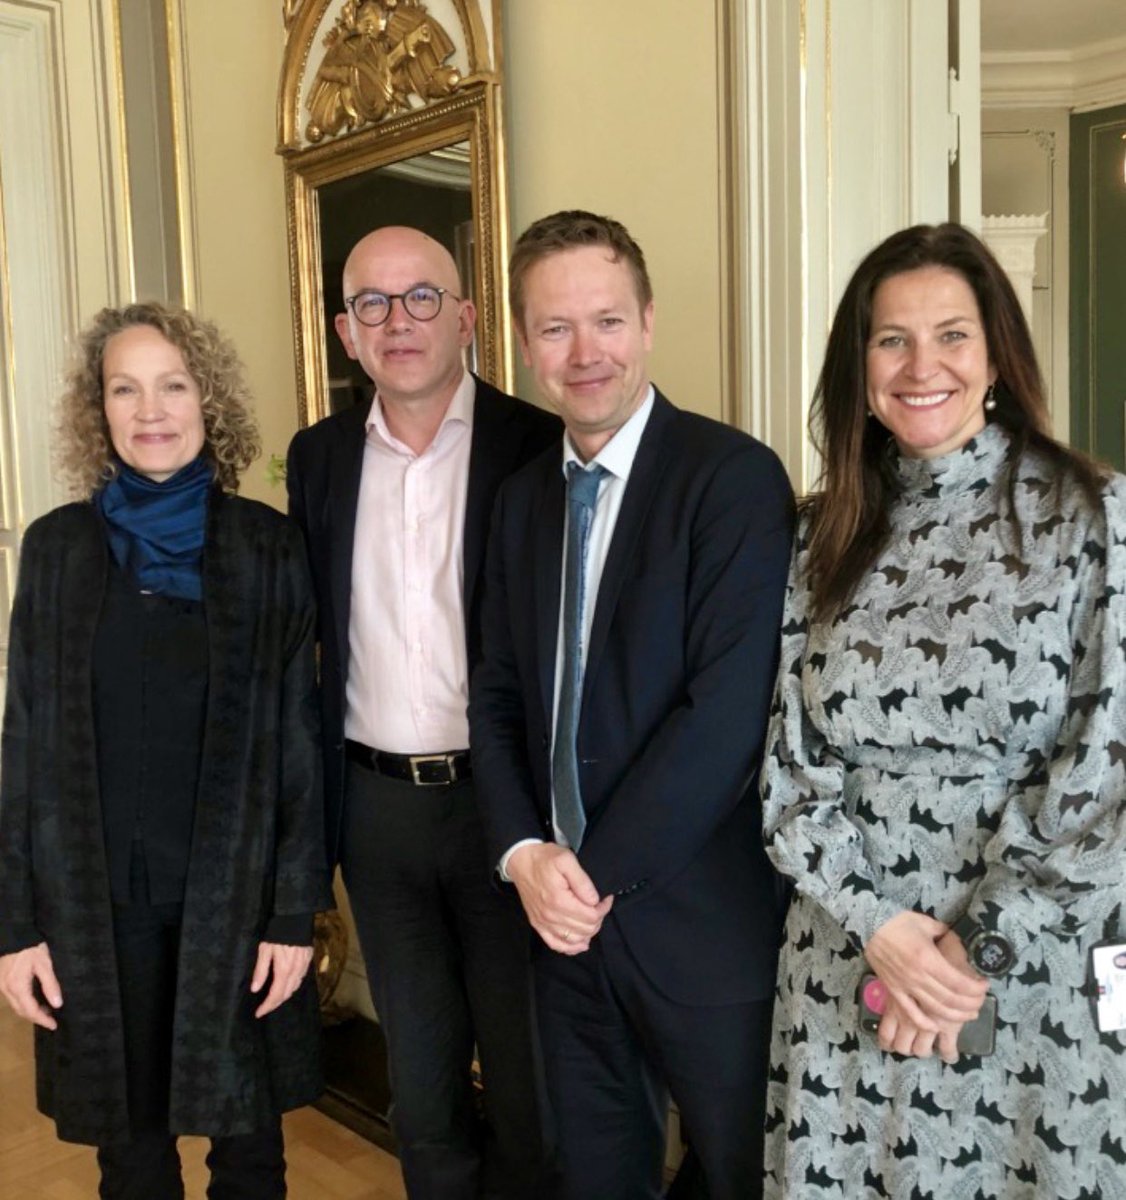 Thank you @YDaccordICRC @ICRC for a good conversation on engaging in protracted crisis and maintaining #humanitarian principles and values. @NorwayMFA #NorwayHumStrategy @NorwayUN @NorwayInGeneva